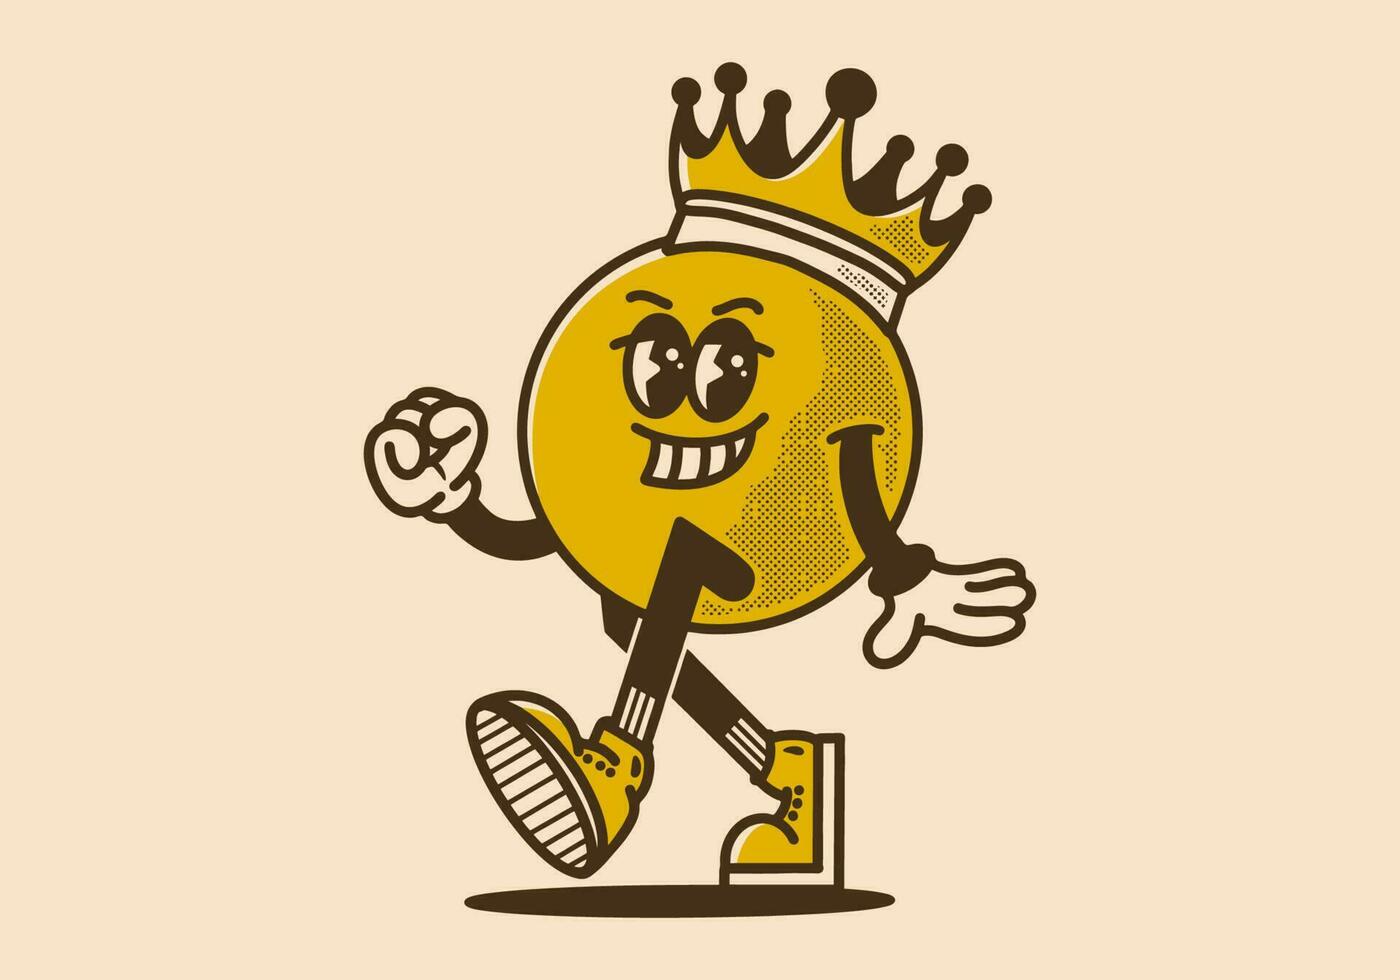 Mascot character design of ball head character wearing a gold crown vector